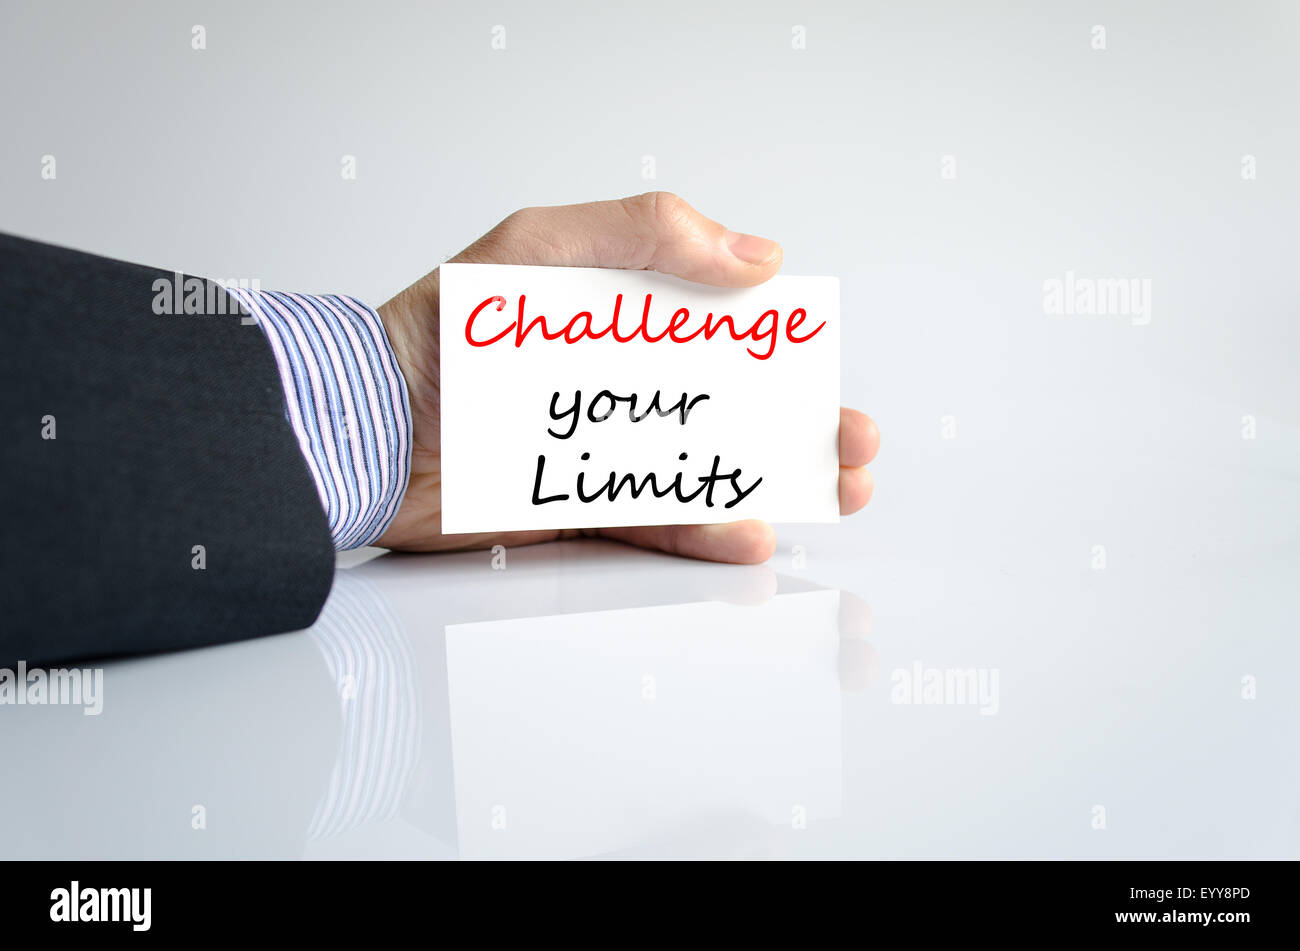 Challenge your limits text concept isolated over white background Stock Photo